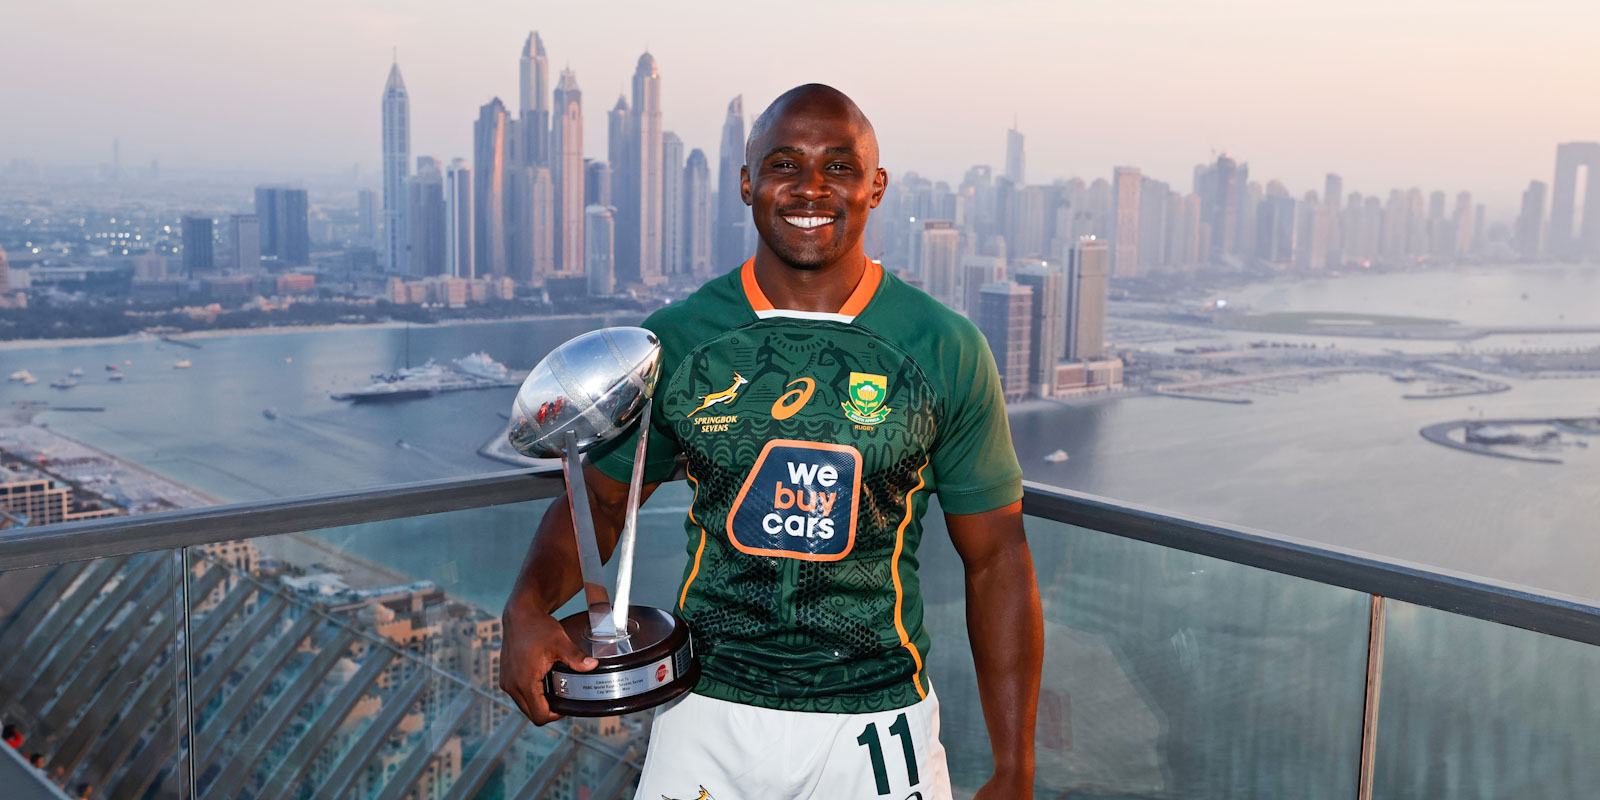 The trophy looks right at place with Siviwe Soyizwapi.